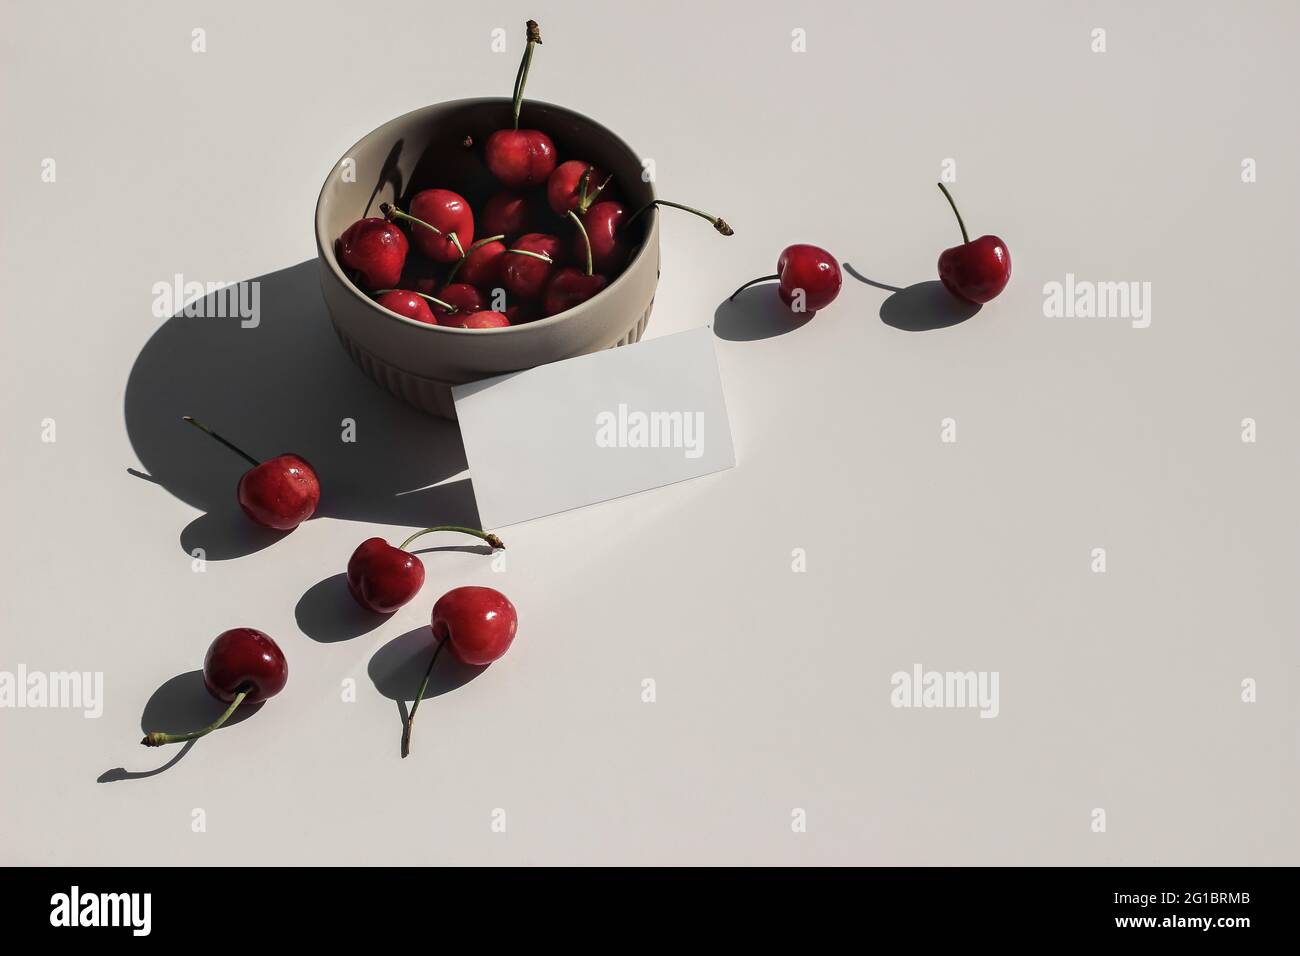 Modern food still life composition. Ceramic Bowl of red cherries on beige table background in sunlight. Blank business card mock ups scene. Top view Stock Photo